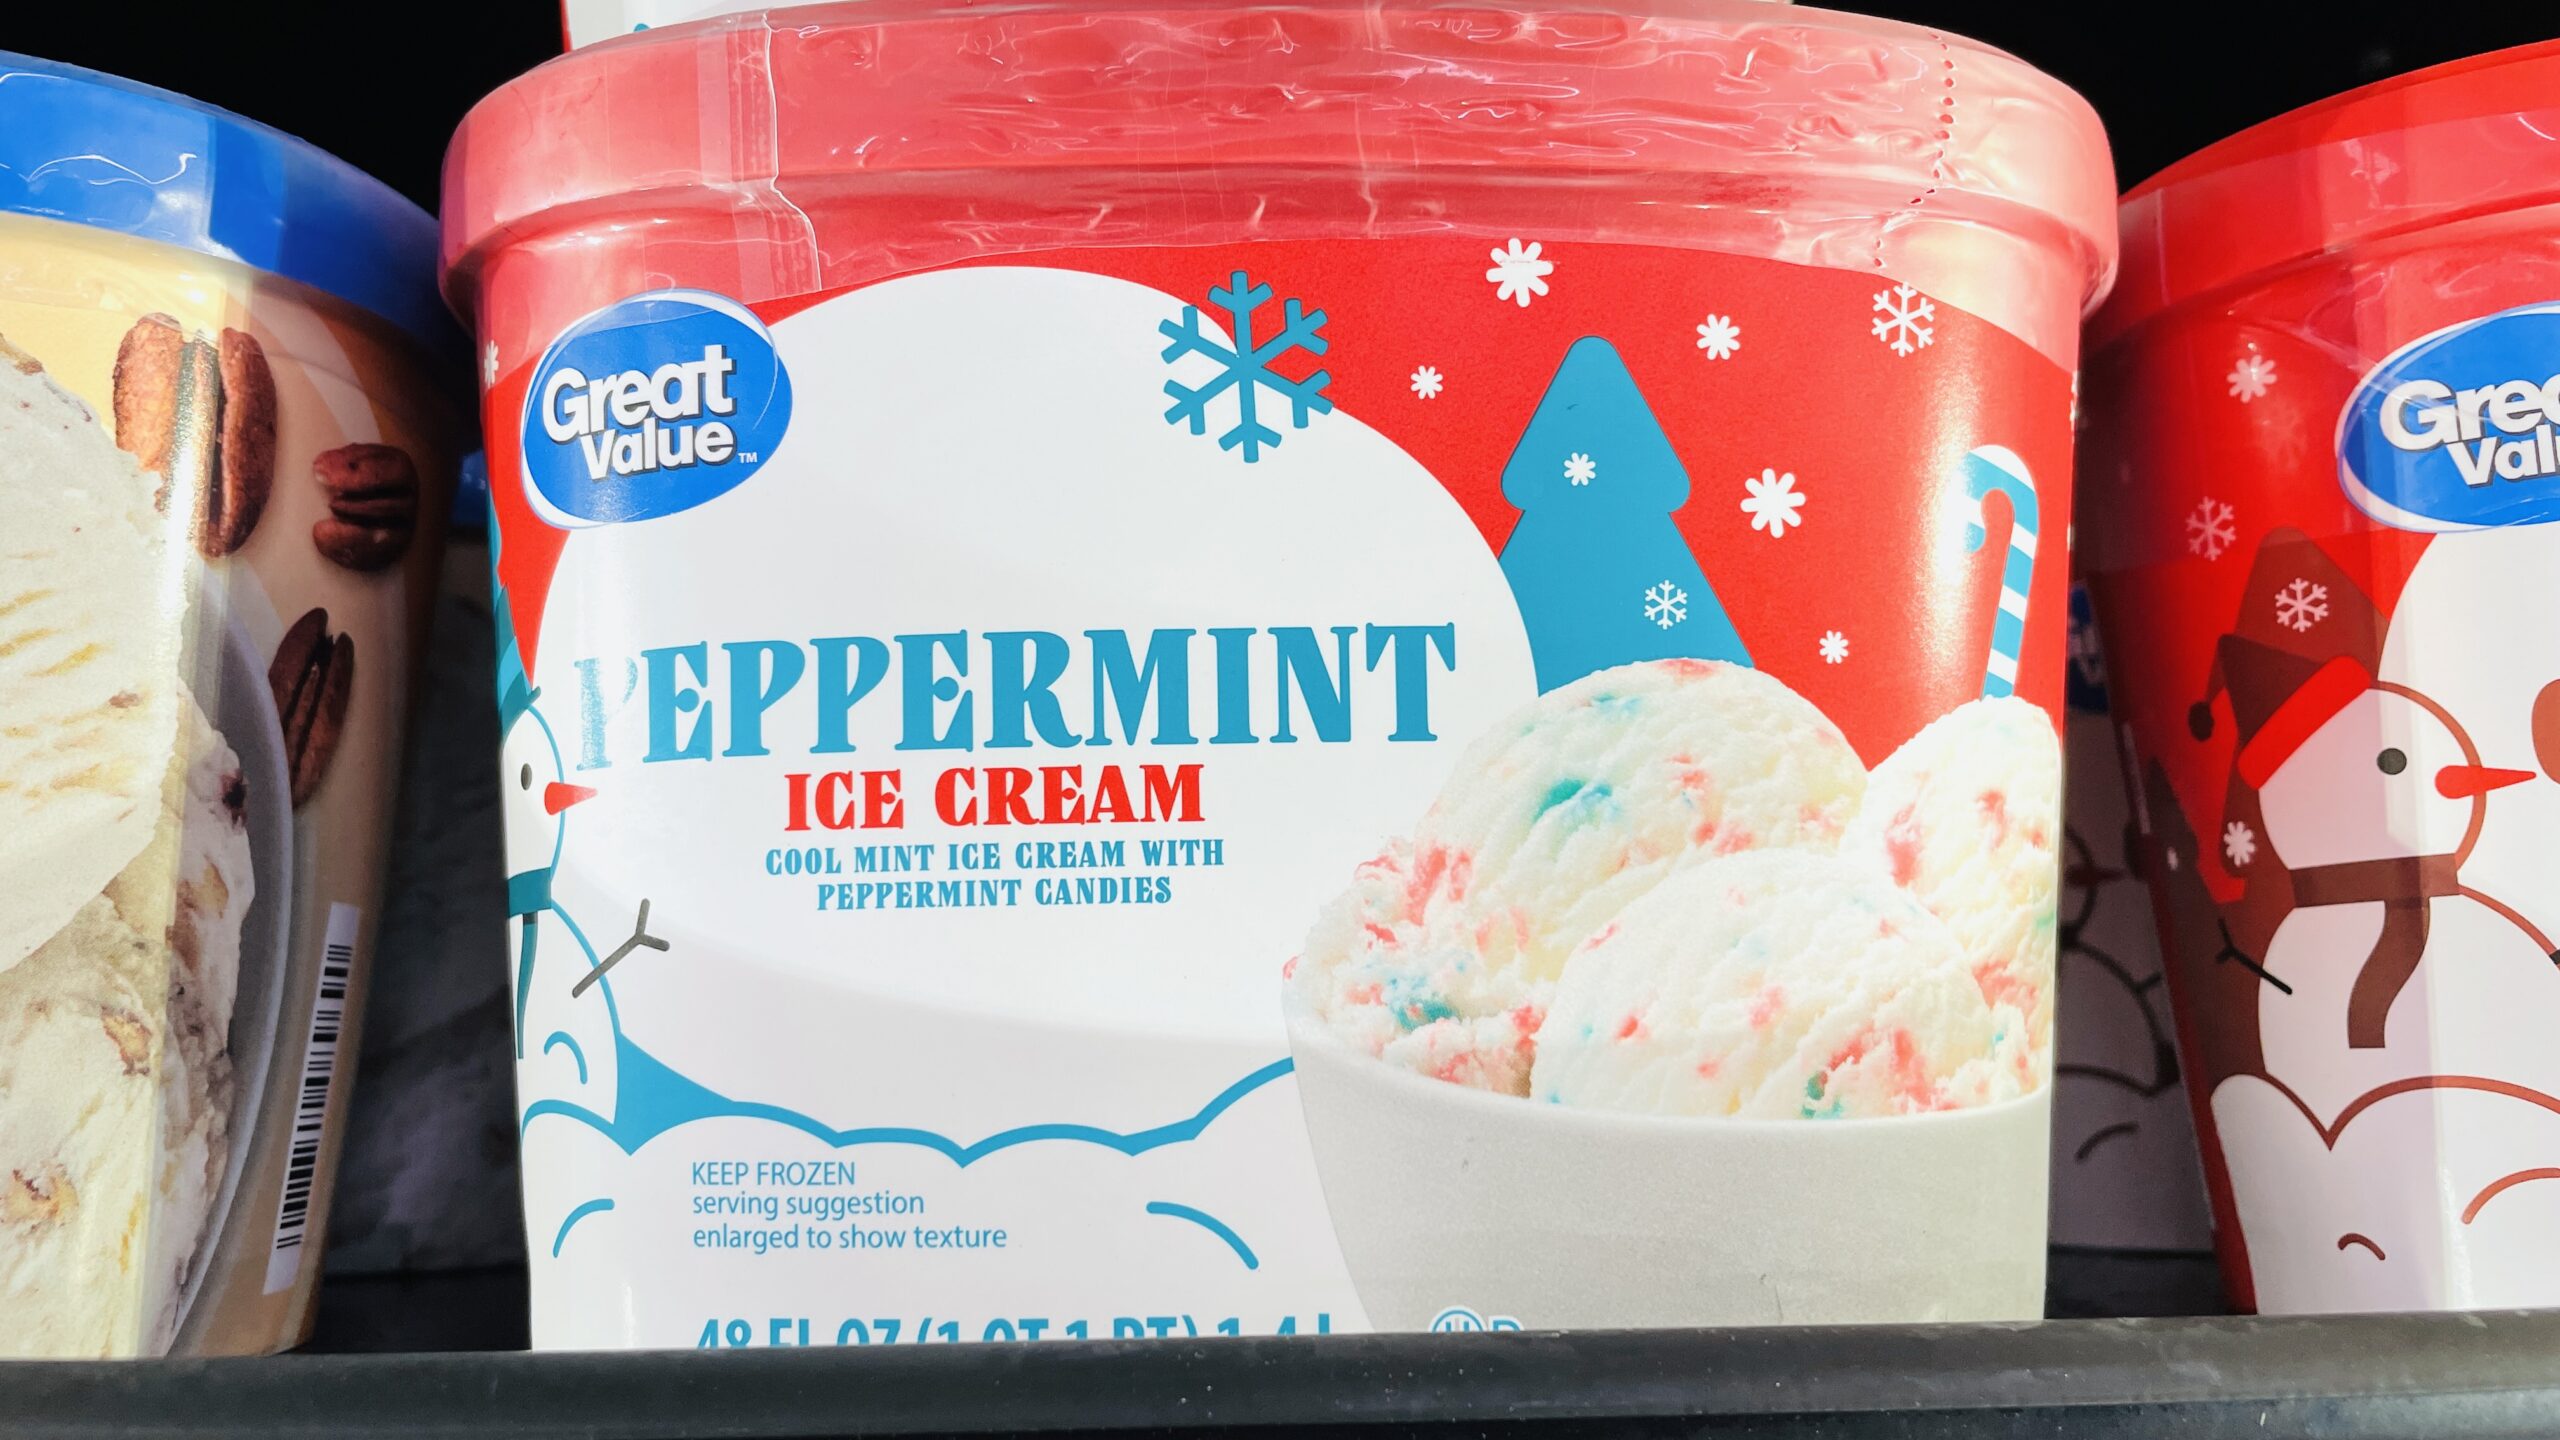 Walmart Is Selling Peppermint Ice Cream So Excuse Me While I Eat The Entire Carton In One Go